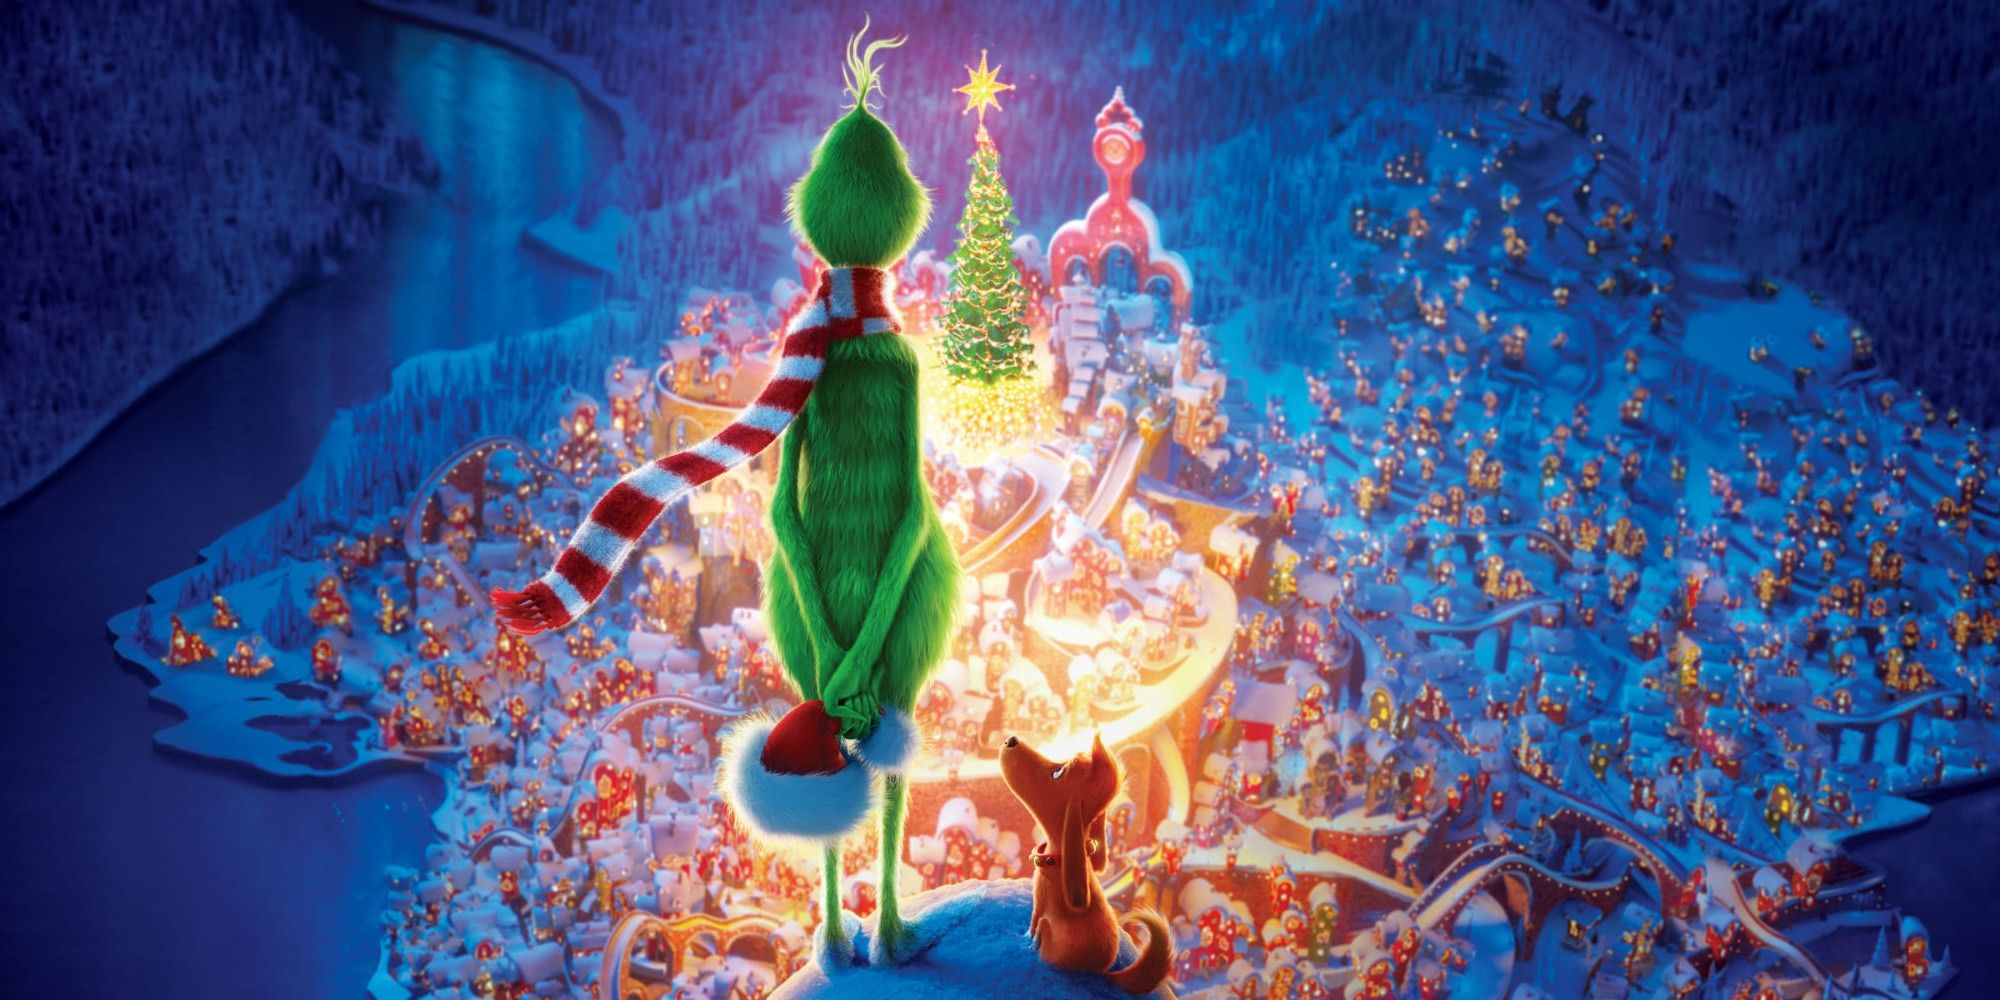 The Grinch looking at Whoville